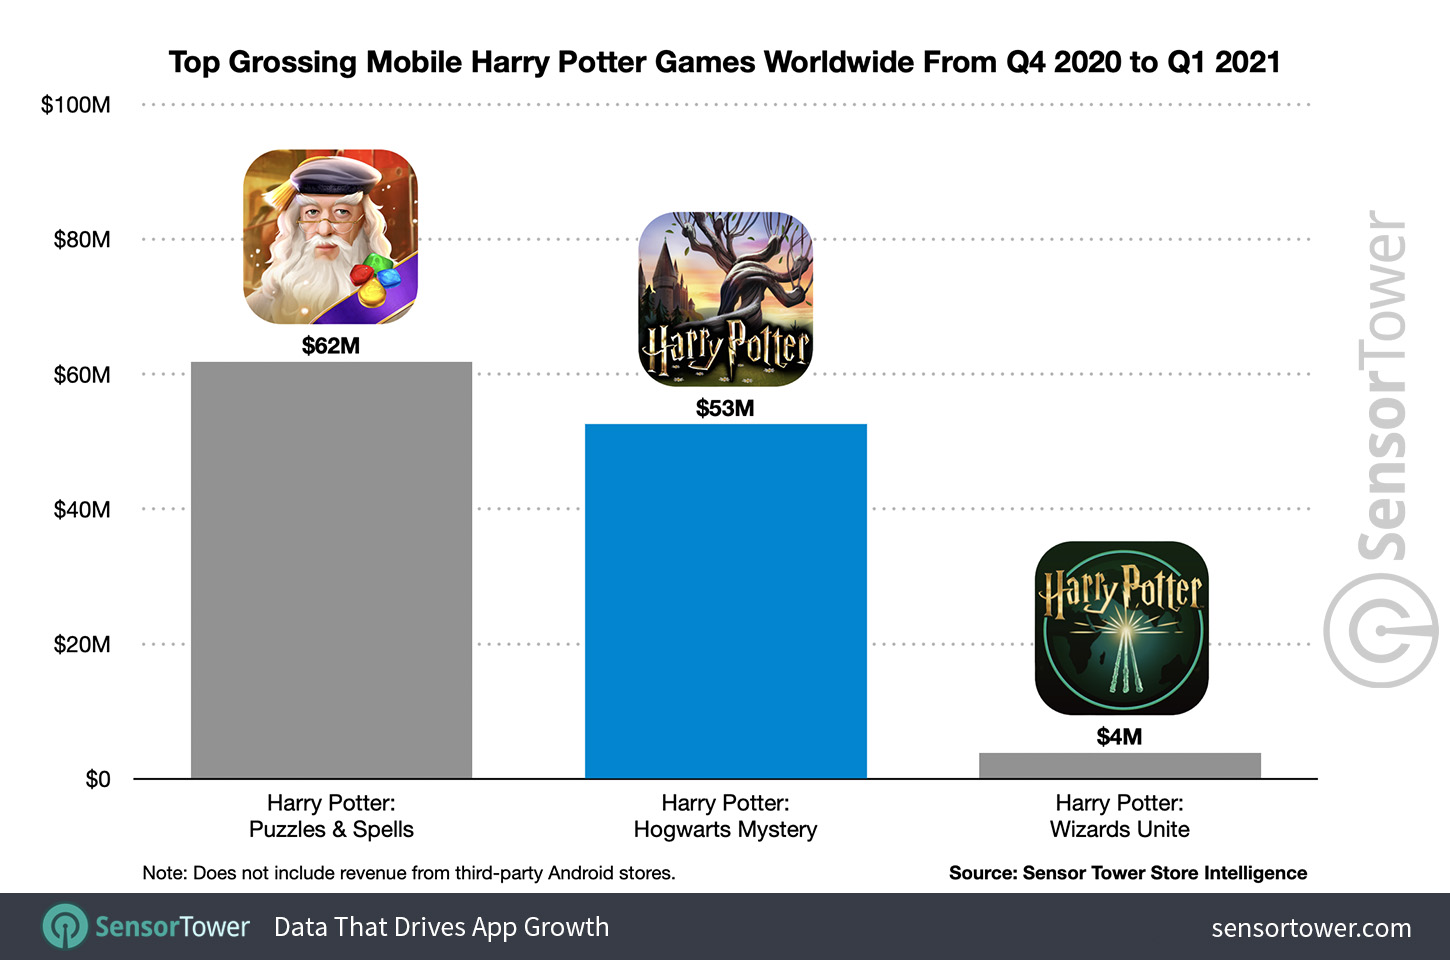 Top Grossing Mobile Harry Potter Games Worldwide From Q4 2020 to Q1 2021